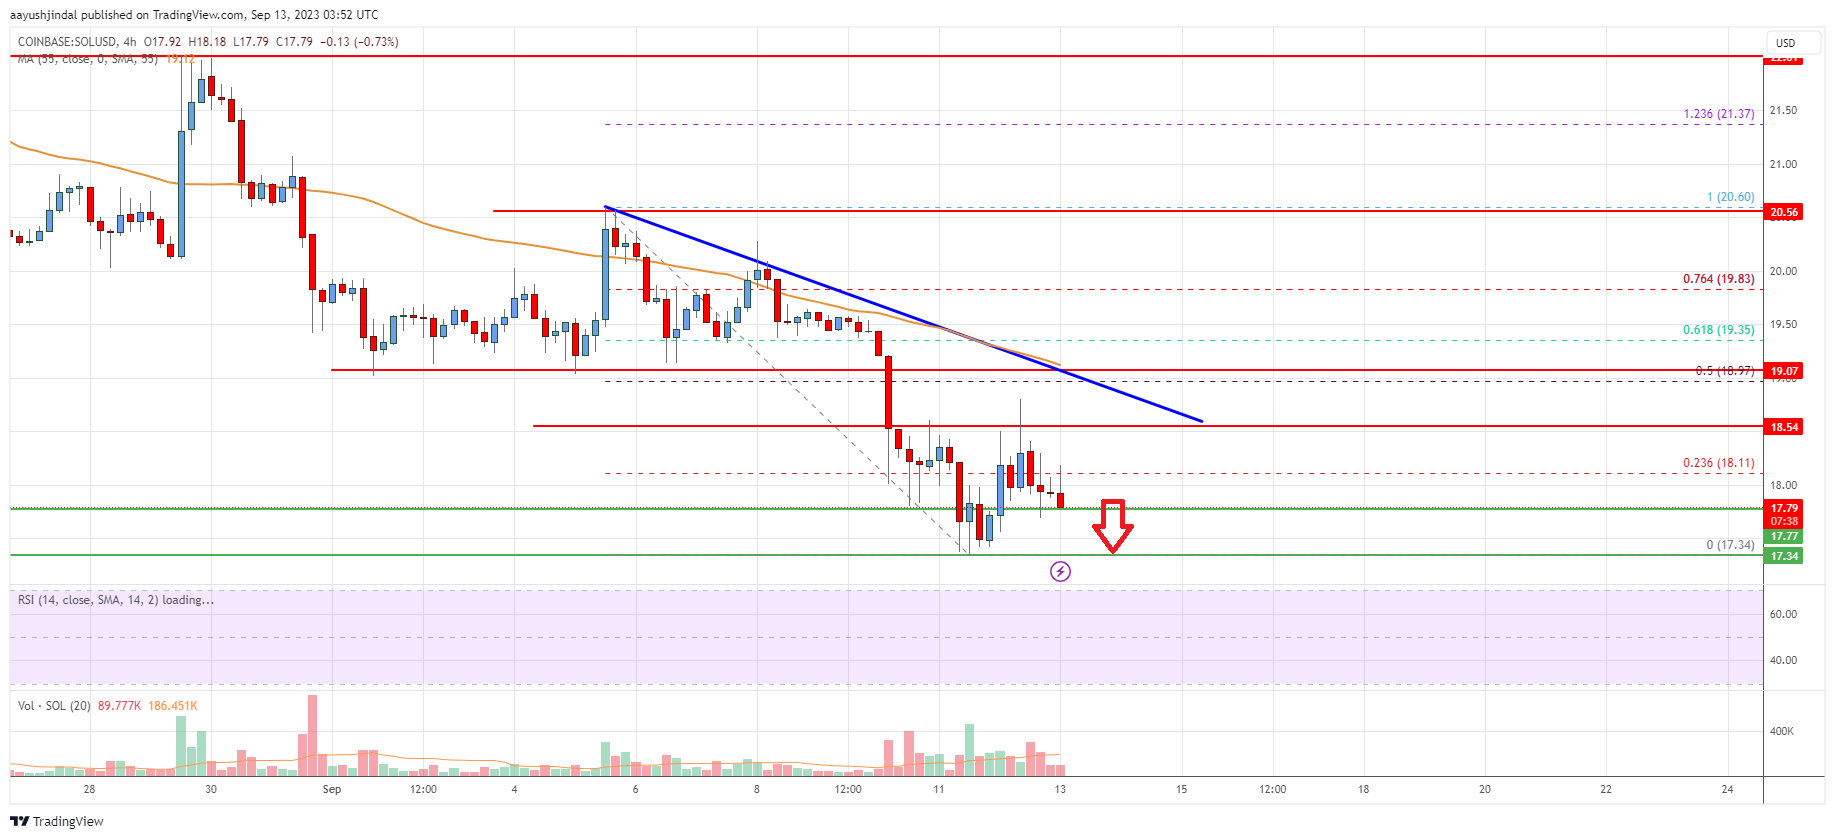 Solana (SOL) Price Analysis: Risk of Another Drop To $16